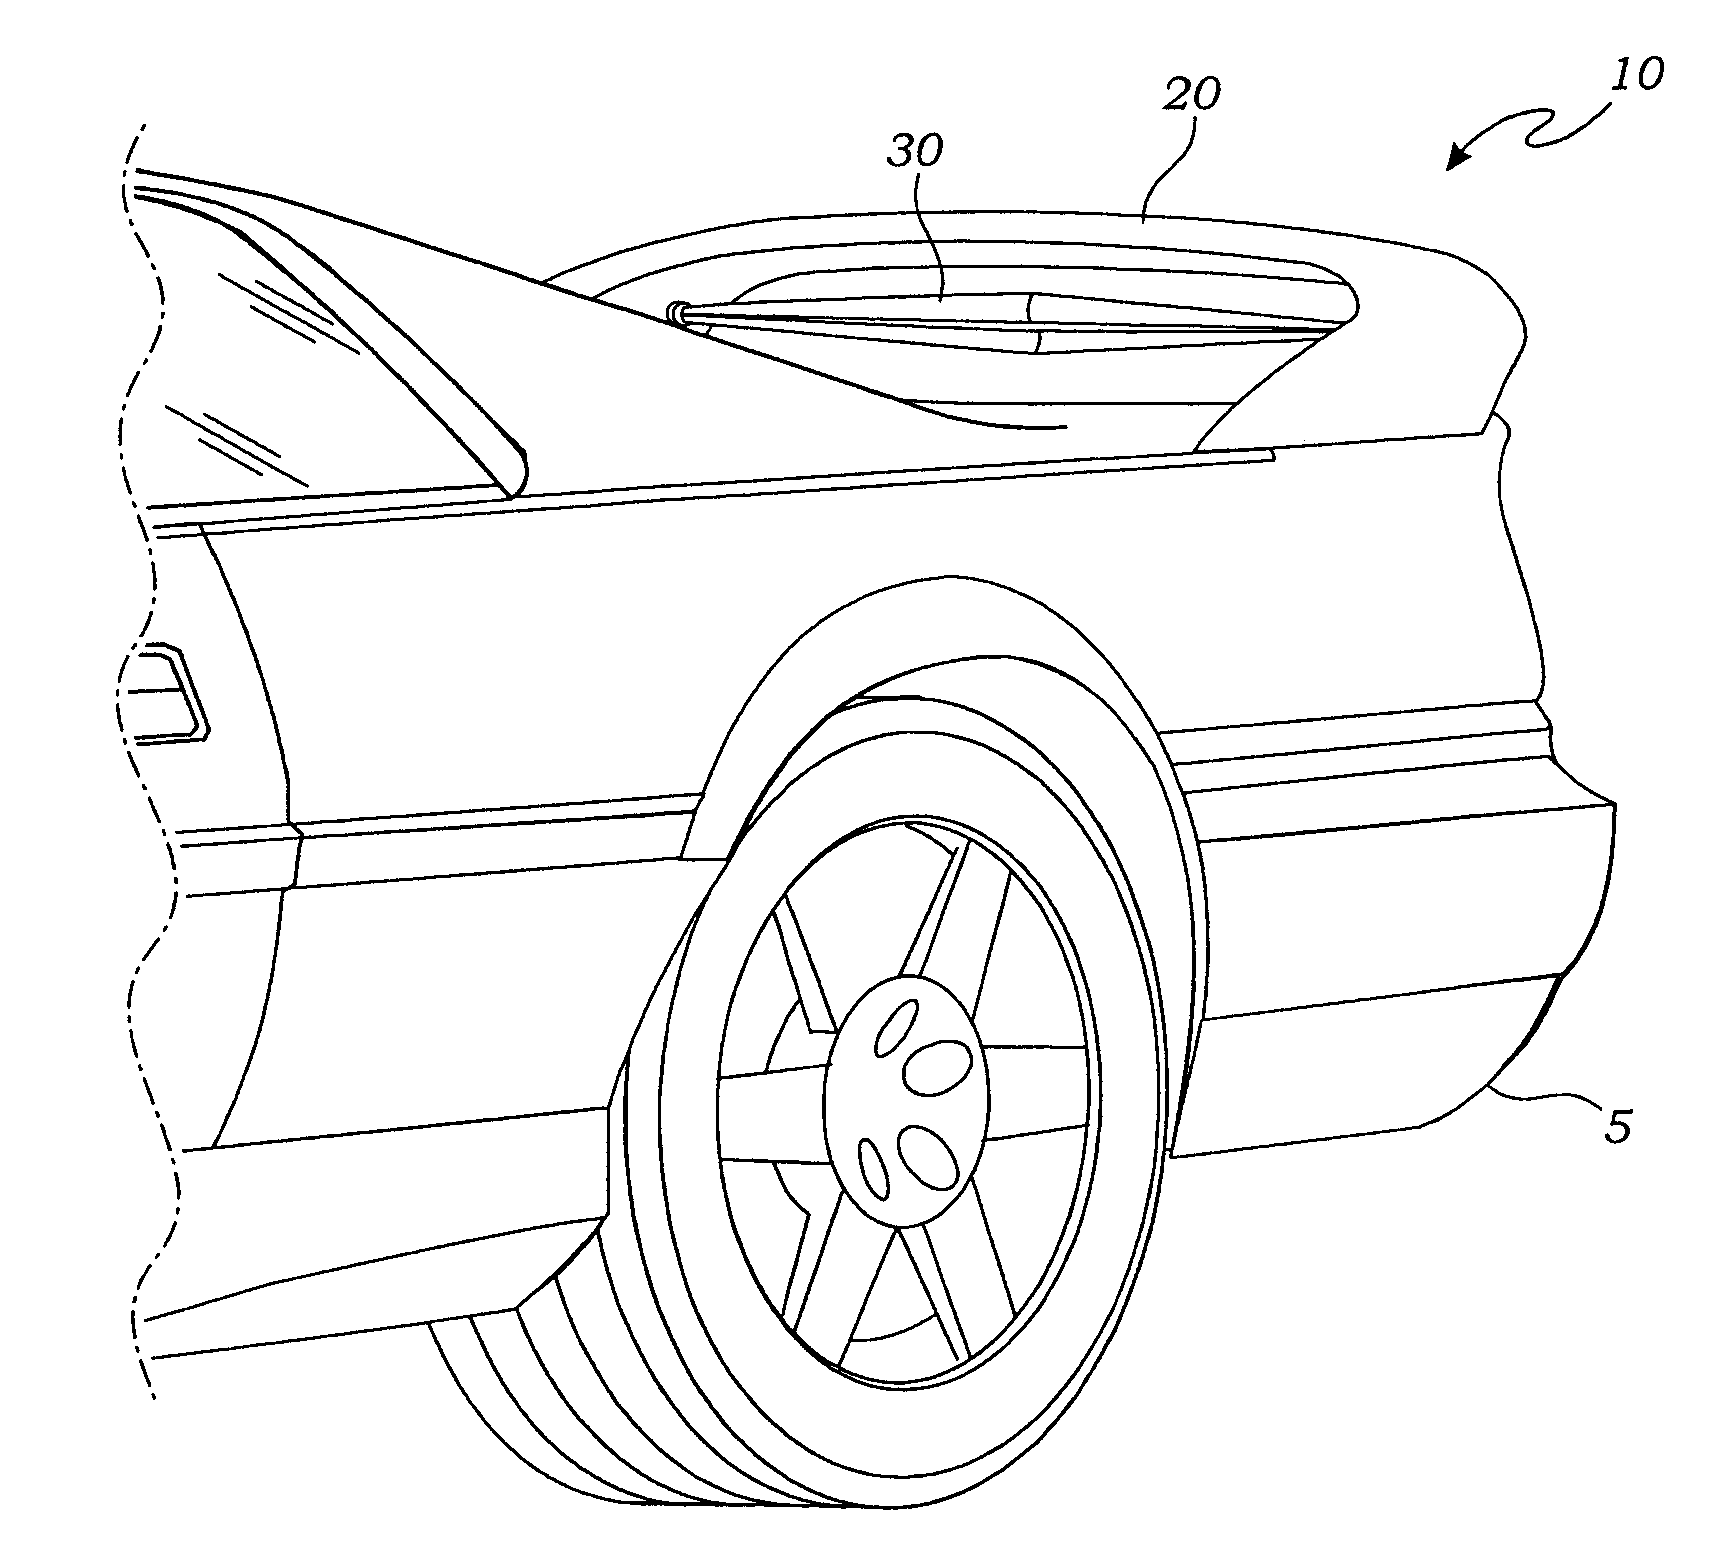 Vehicle spoiler with spinner mechanism